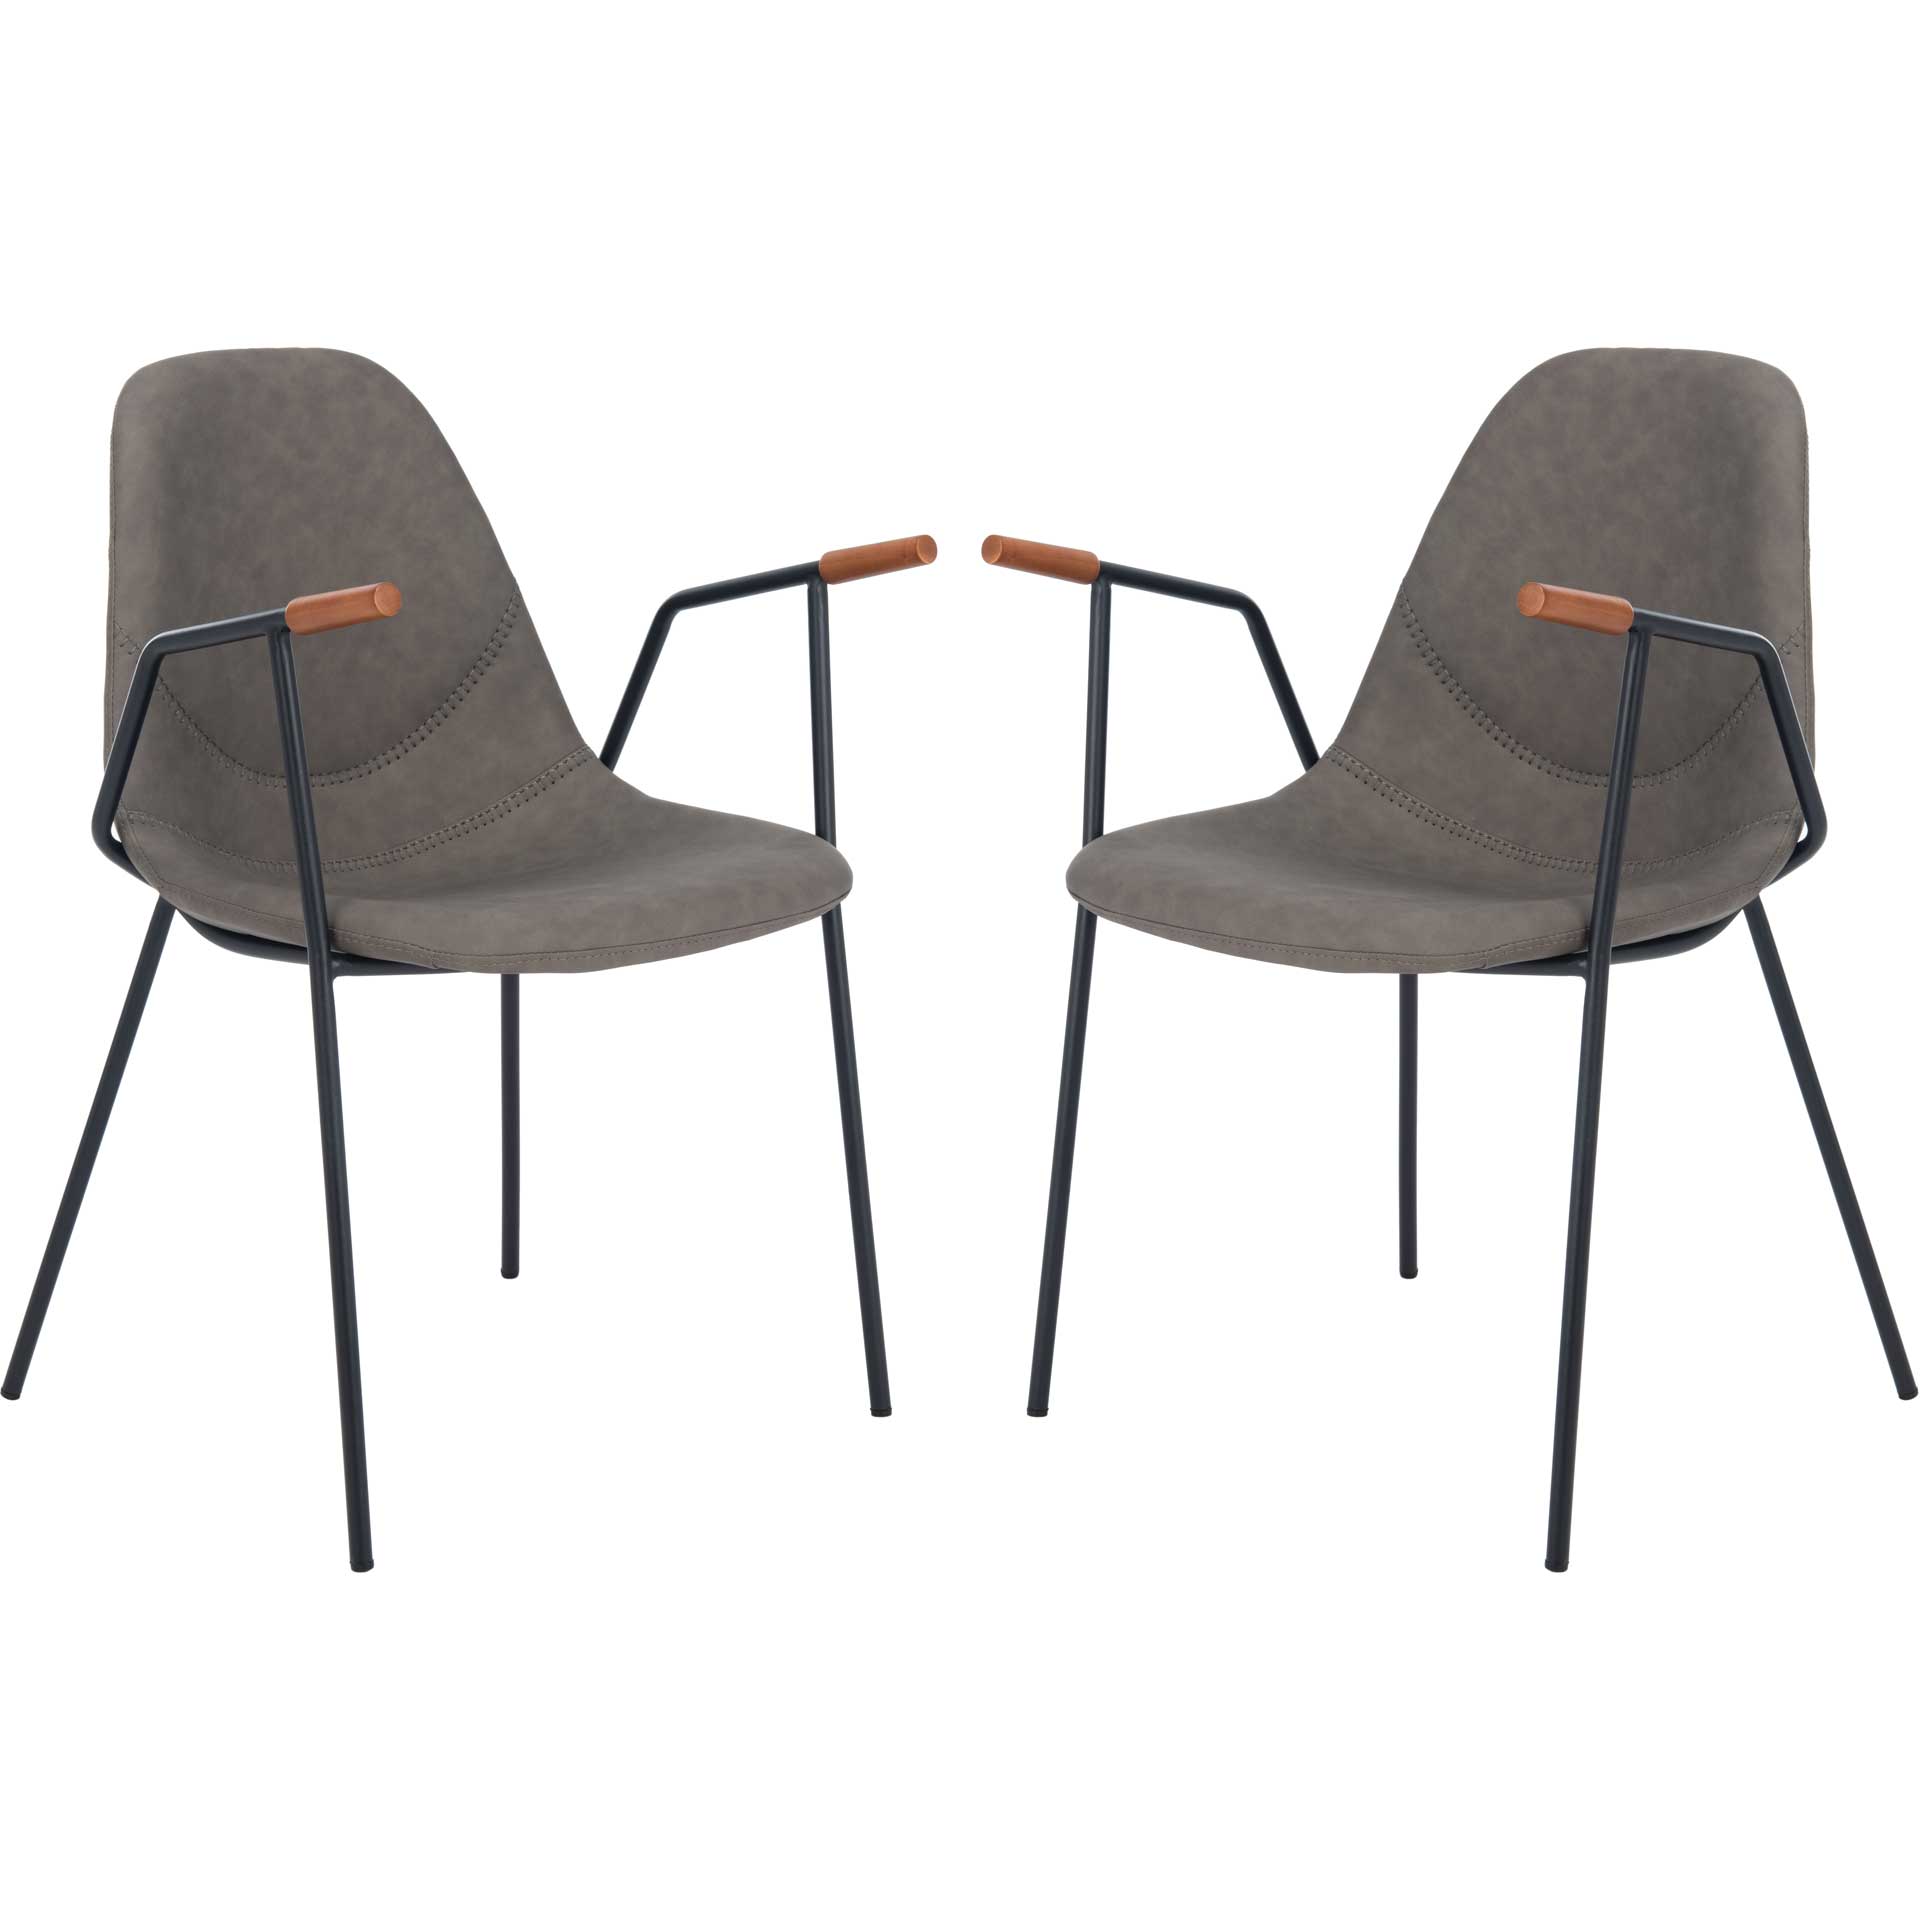 Taos Mid Century Dining Chair Ash Gray (Set of 2)